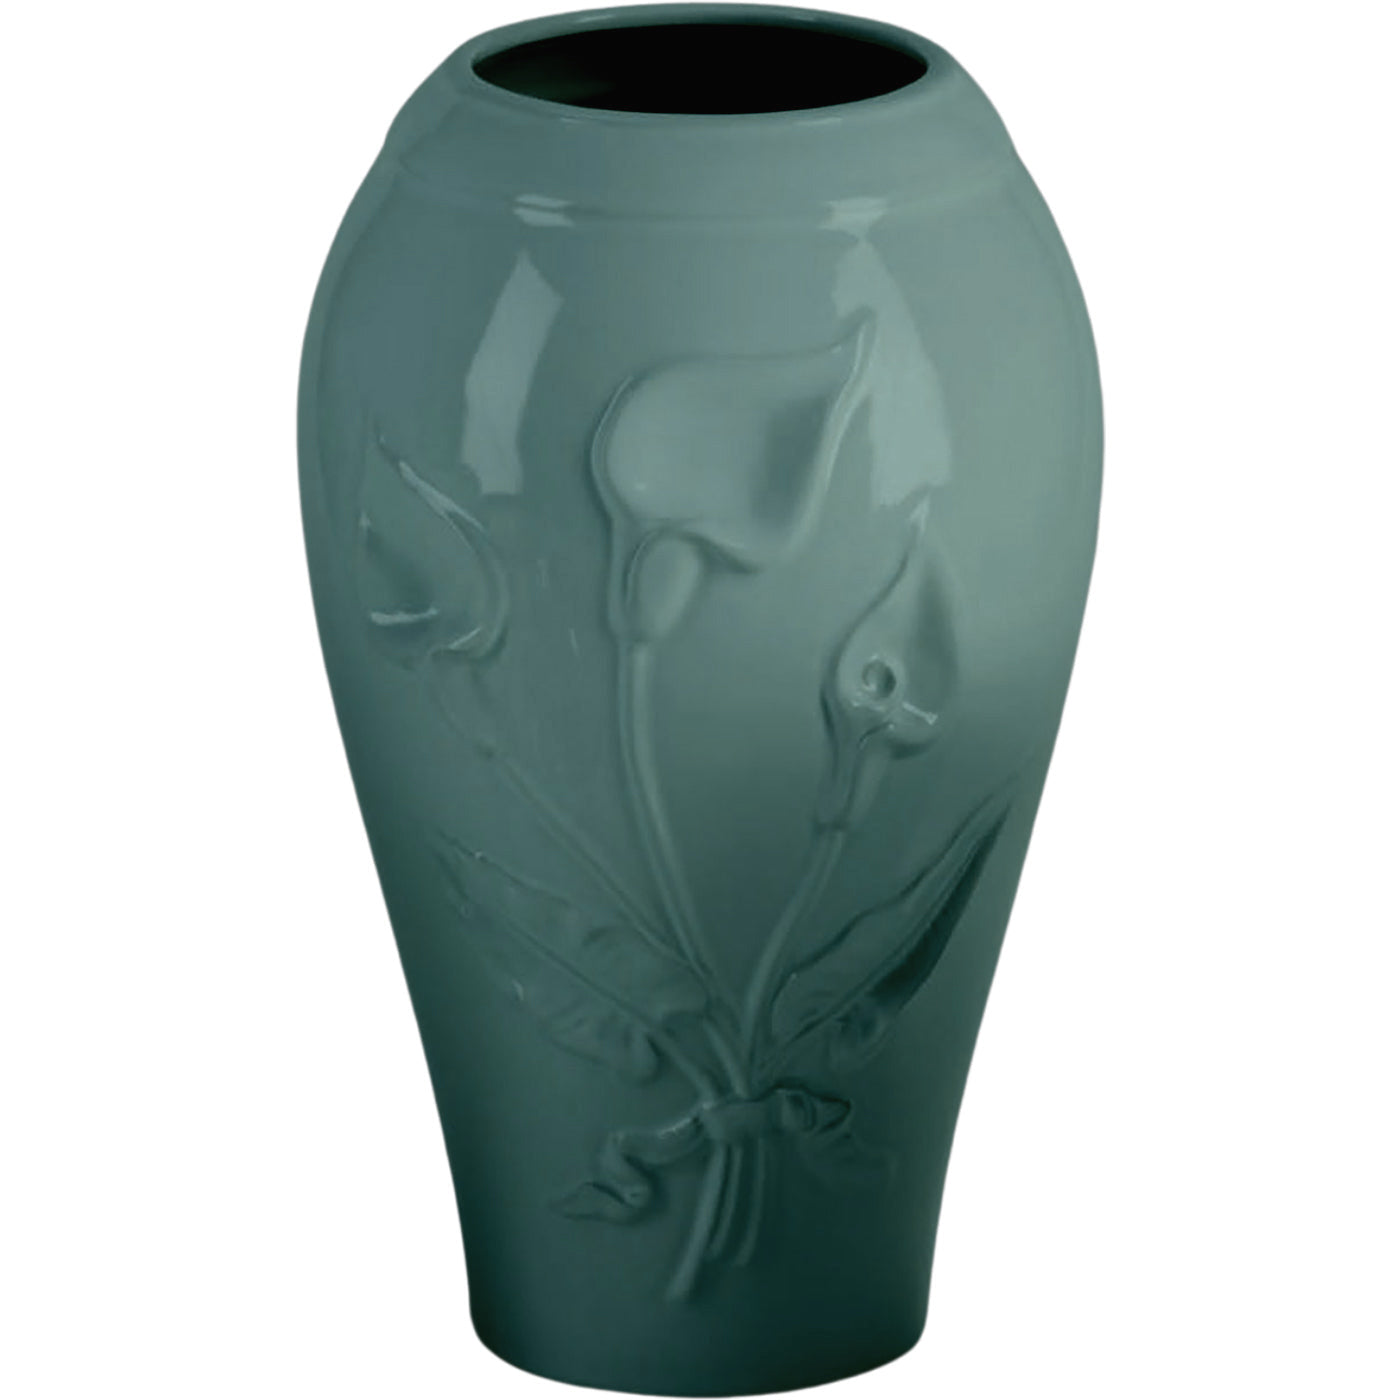 Grave vase Calla green 21x13cm - 8.3x5.1in In green porcelain, ground attached CAL162P/V